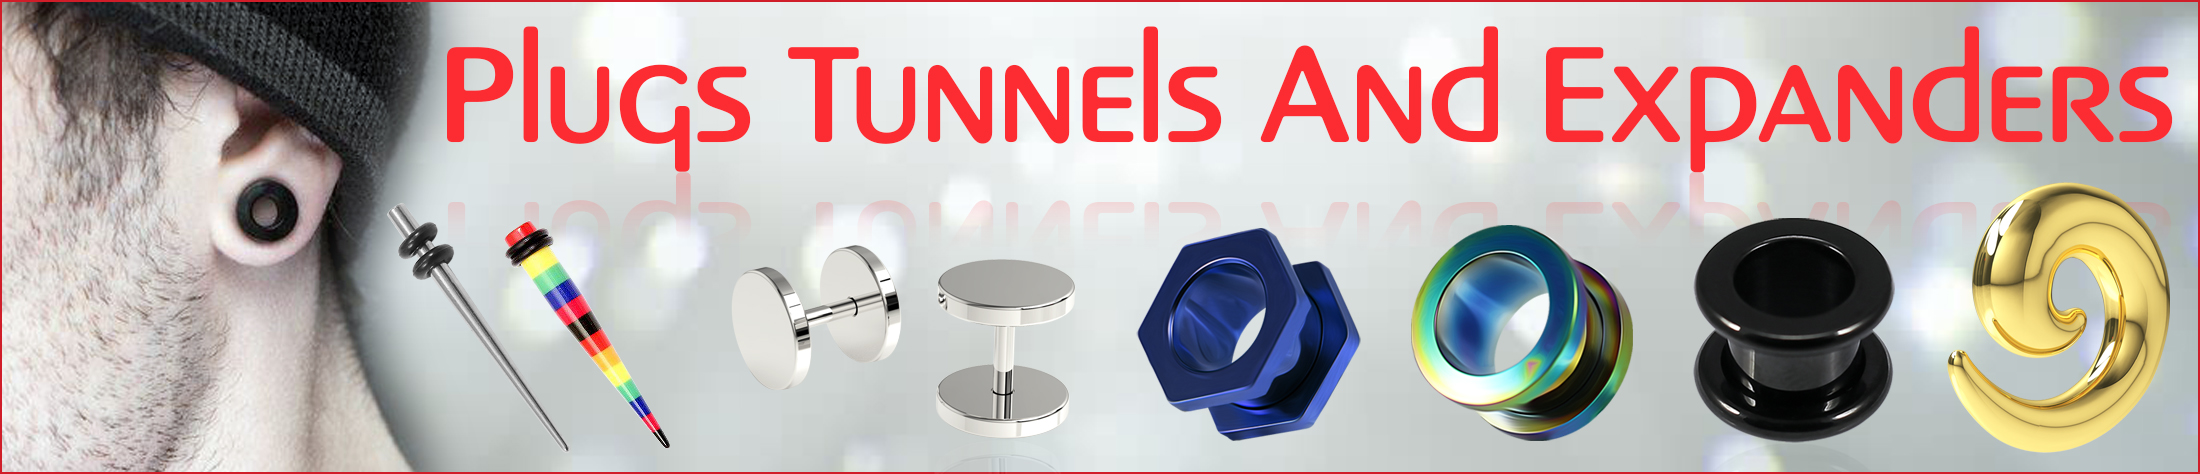 Plugs-Tunnels-Expanders